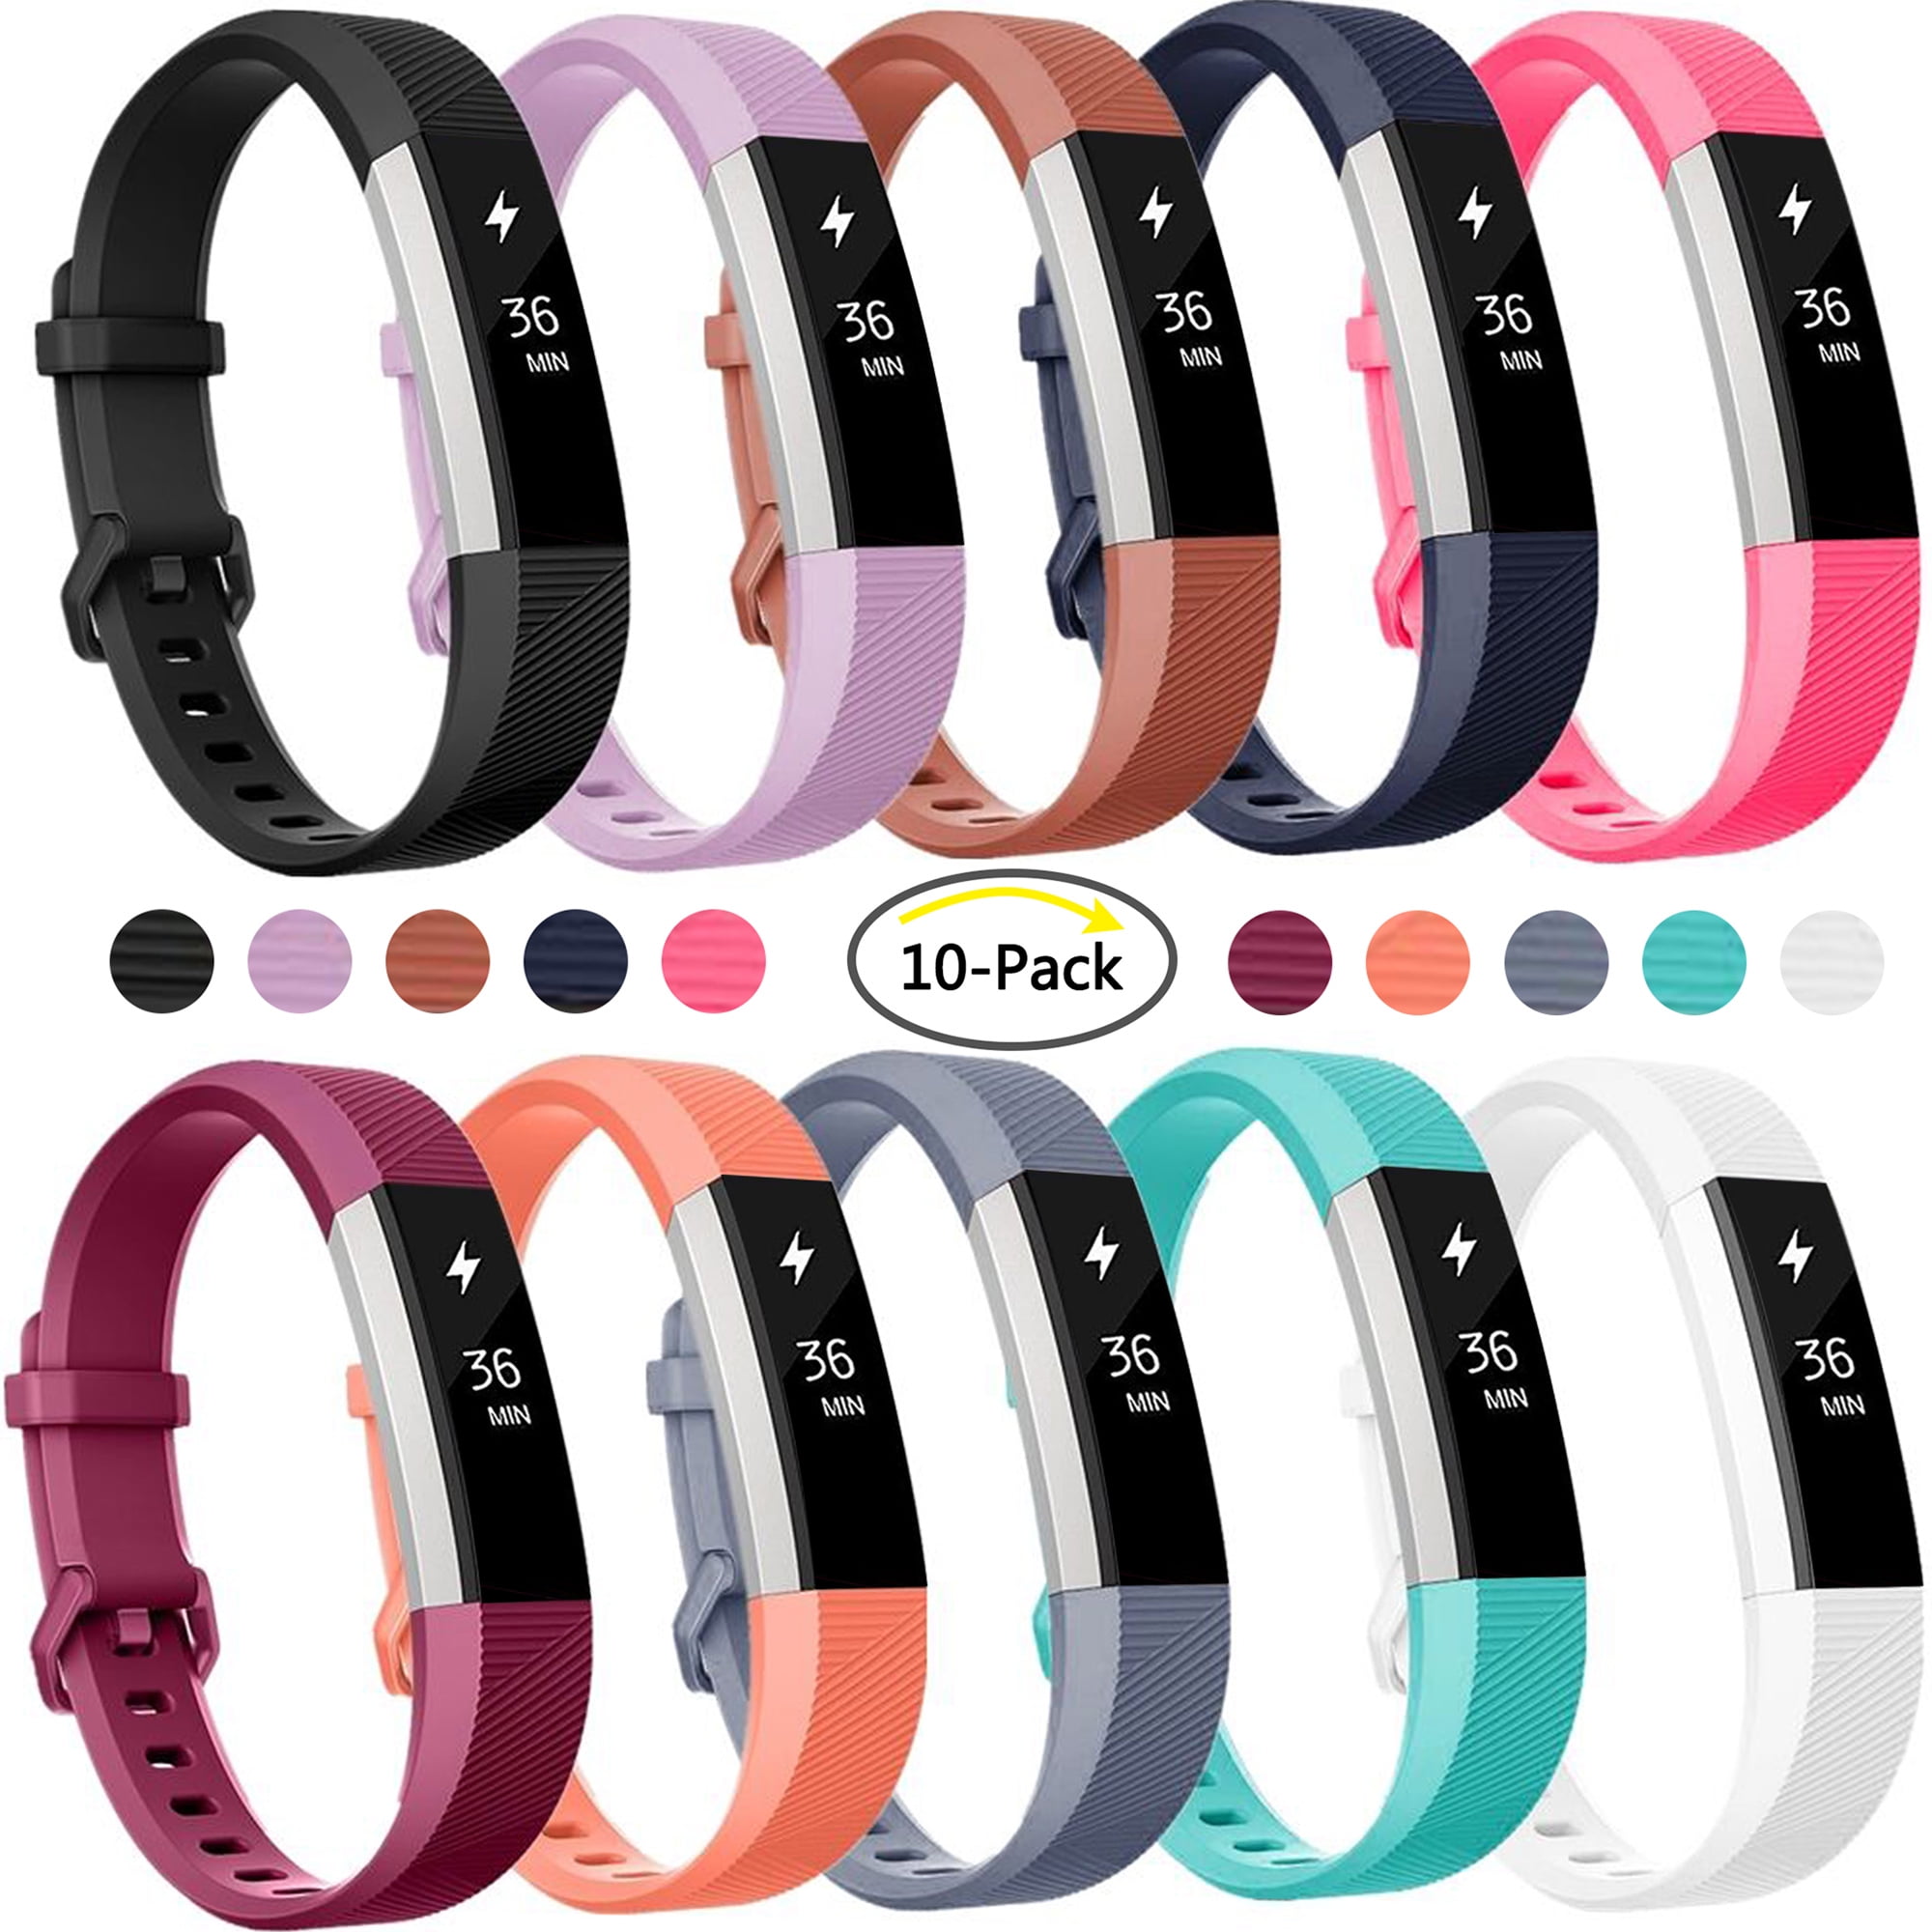 Genuine Leather Adjustable Comfortable Wristbands for Fitbit Alta HR/Fitbit Alta AK Bands Compatible with Fitbit Alta HR Bands 